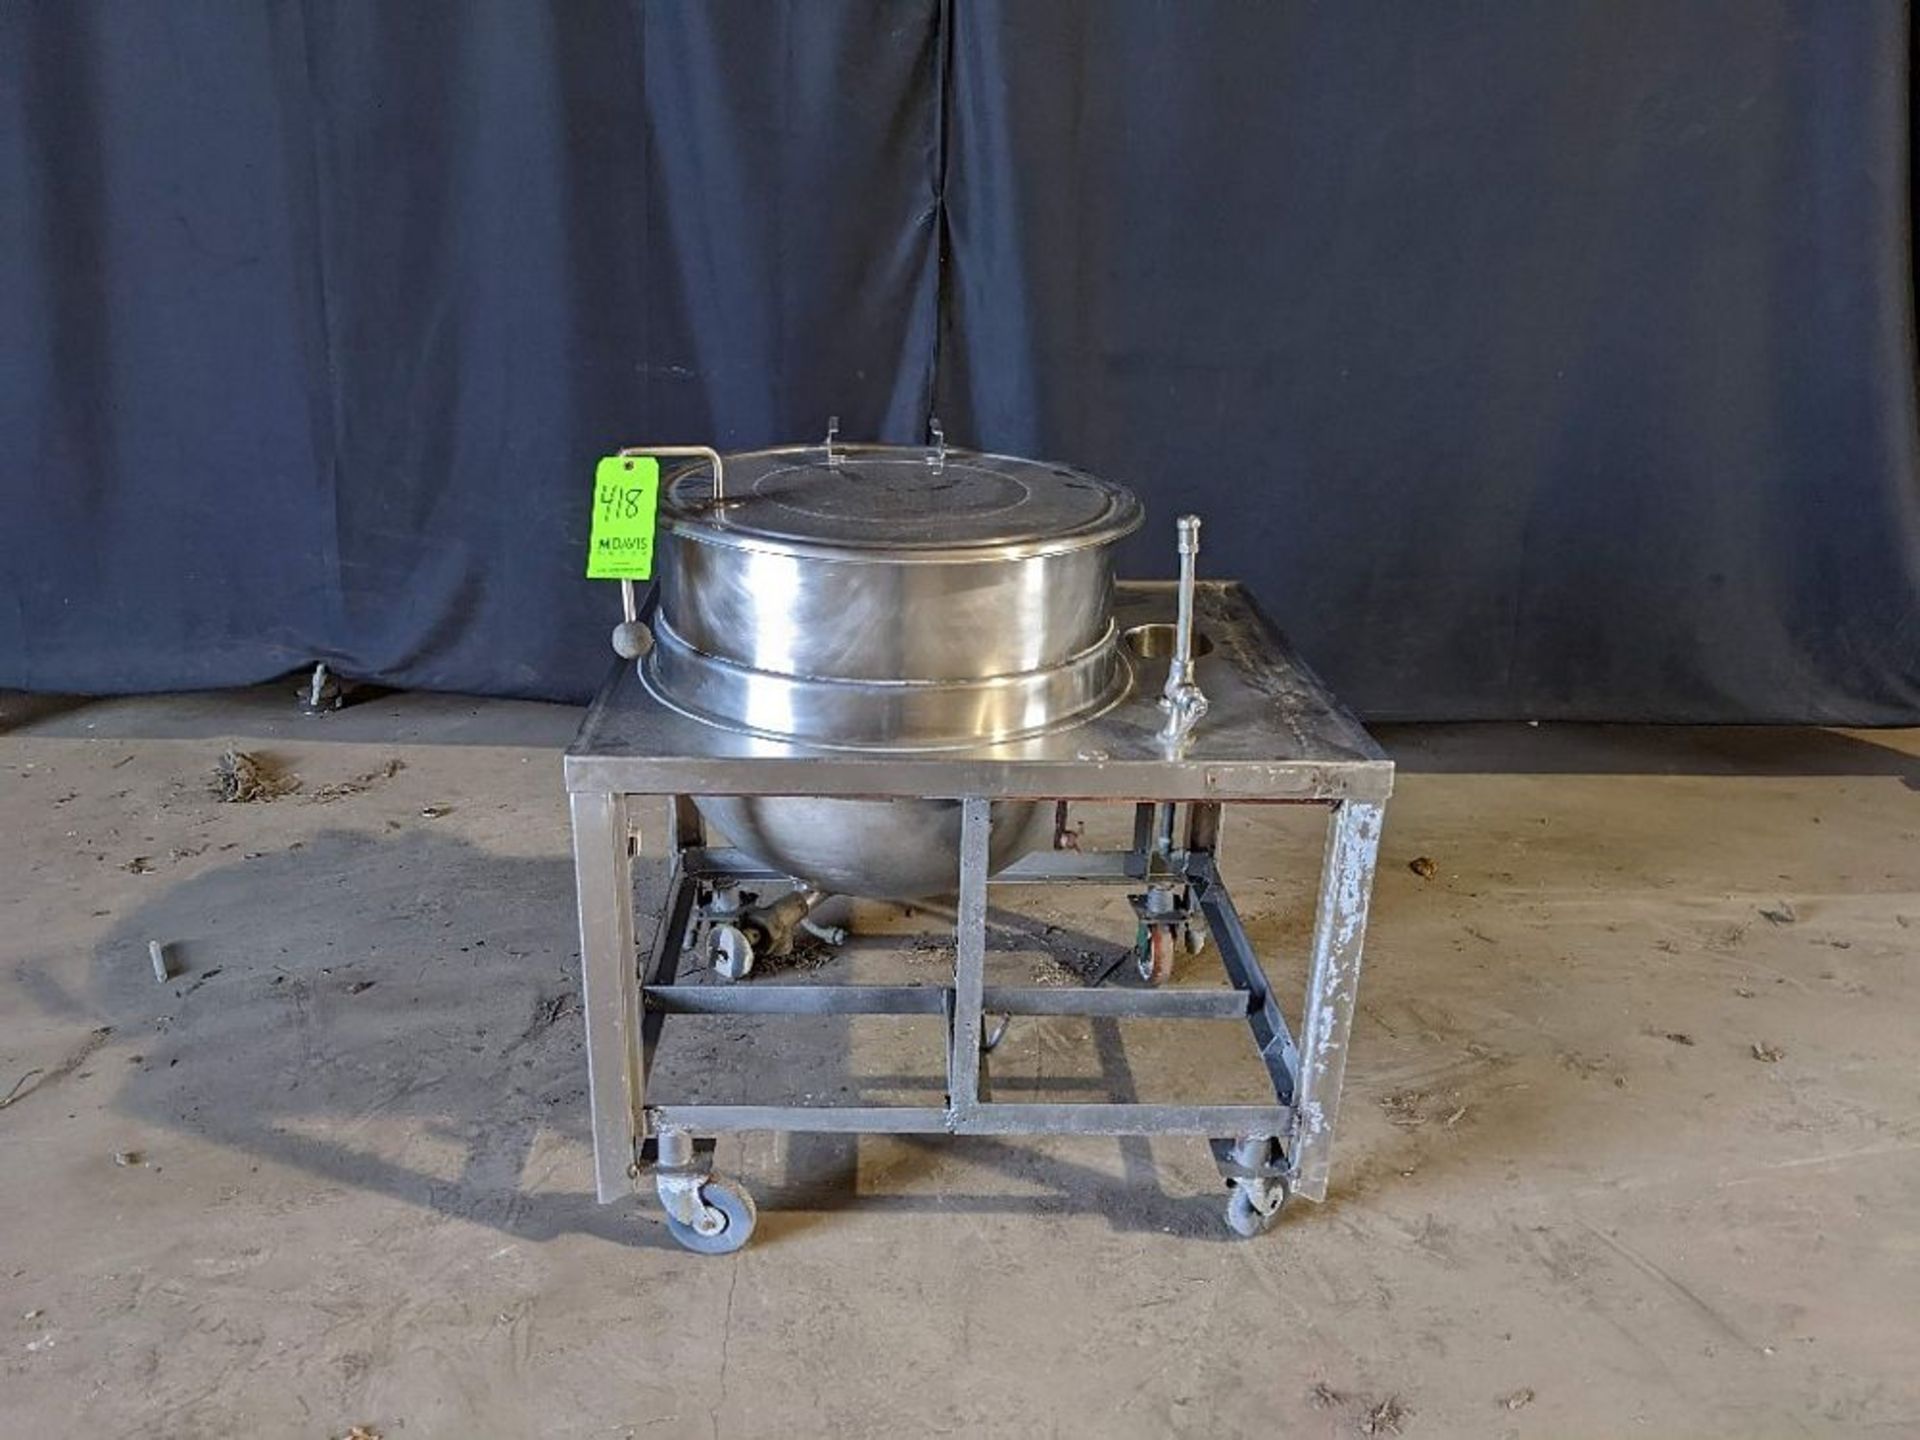 Qty (1) 40 Gallon Jacketed Kettle - Integrated with Stainless Table with Drain - Includes Hinged